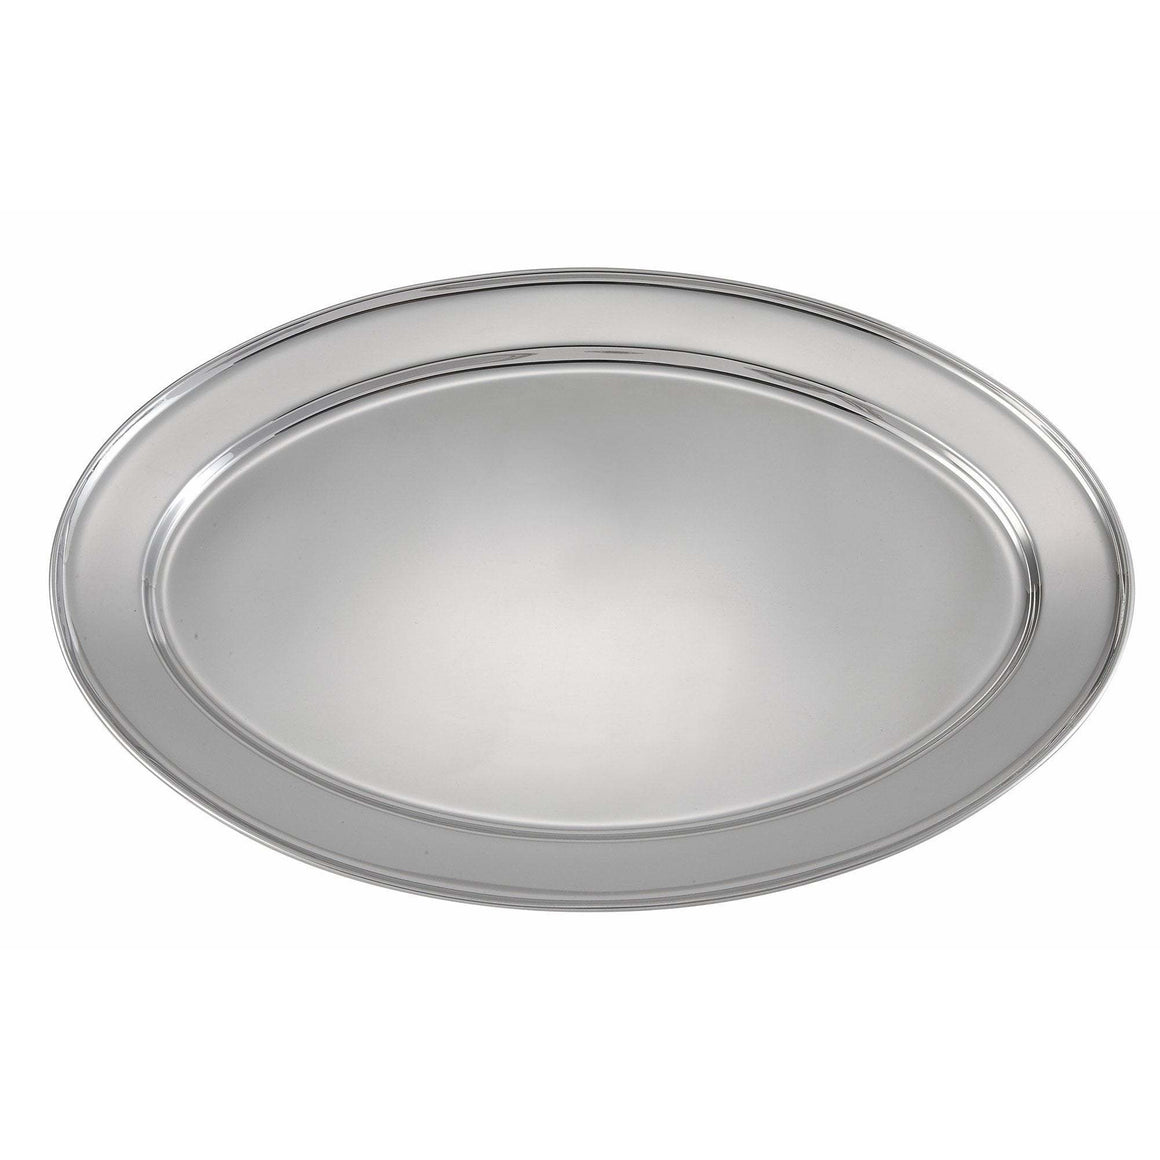 Winco - OPL-22 - Serving Platter, Oval, 21-3/4" x 14-1/2", Stainless Steel - Tabletop - Maltese & Co New and Used  restaurant Equipment 